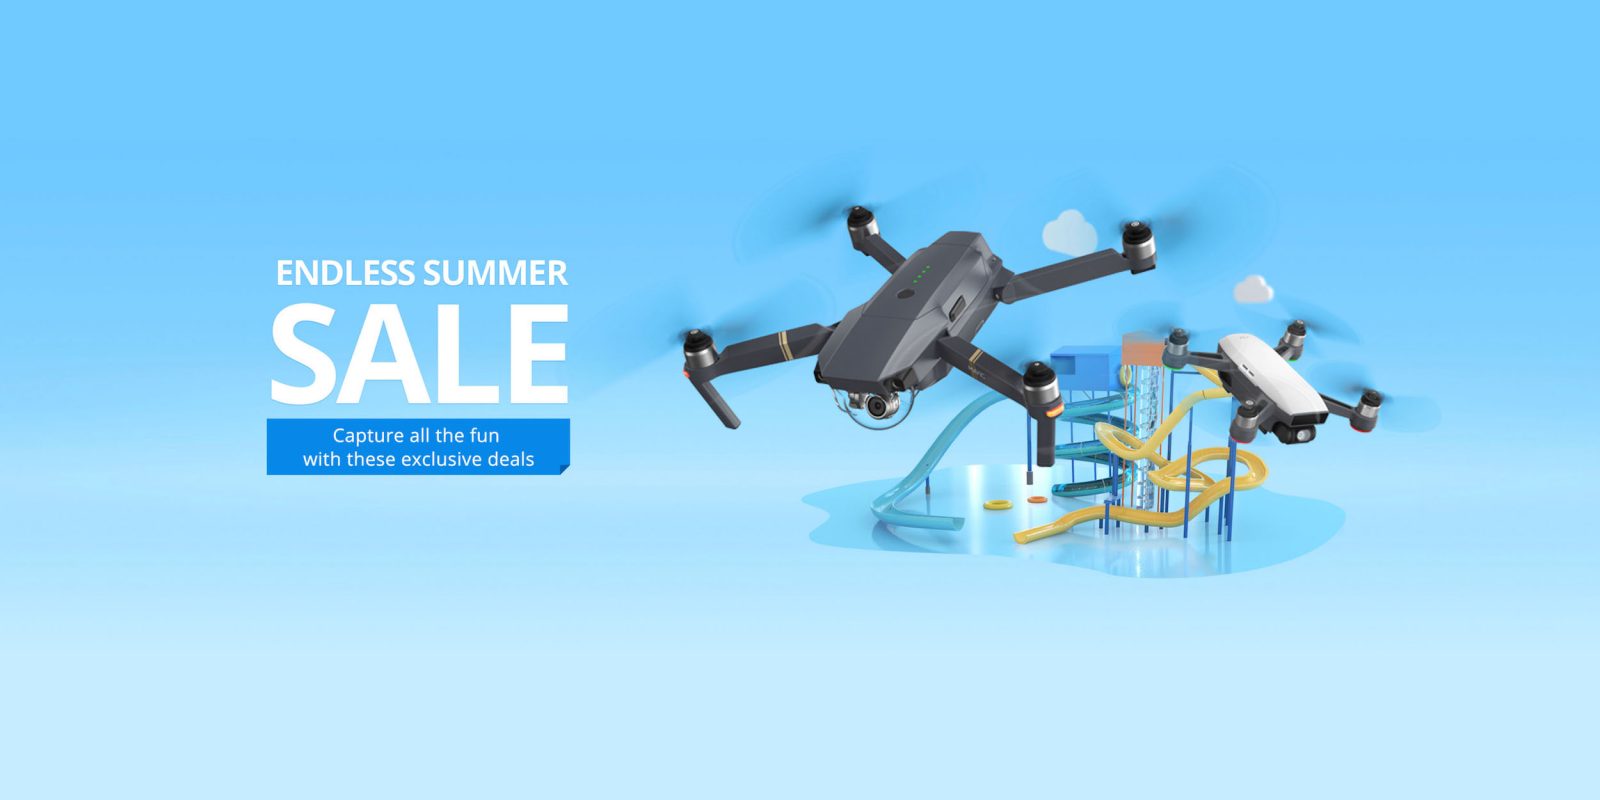 DJI just announced, for a limited time only, the DJI Endless Summer Sale Event with special discounts on various combinations of their products: